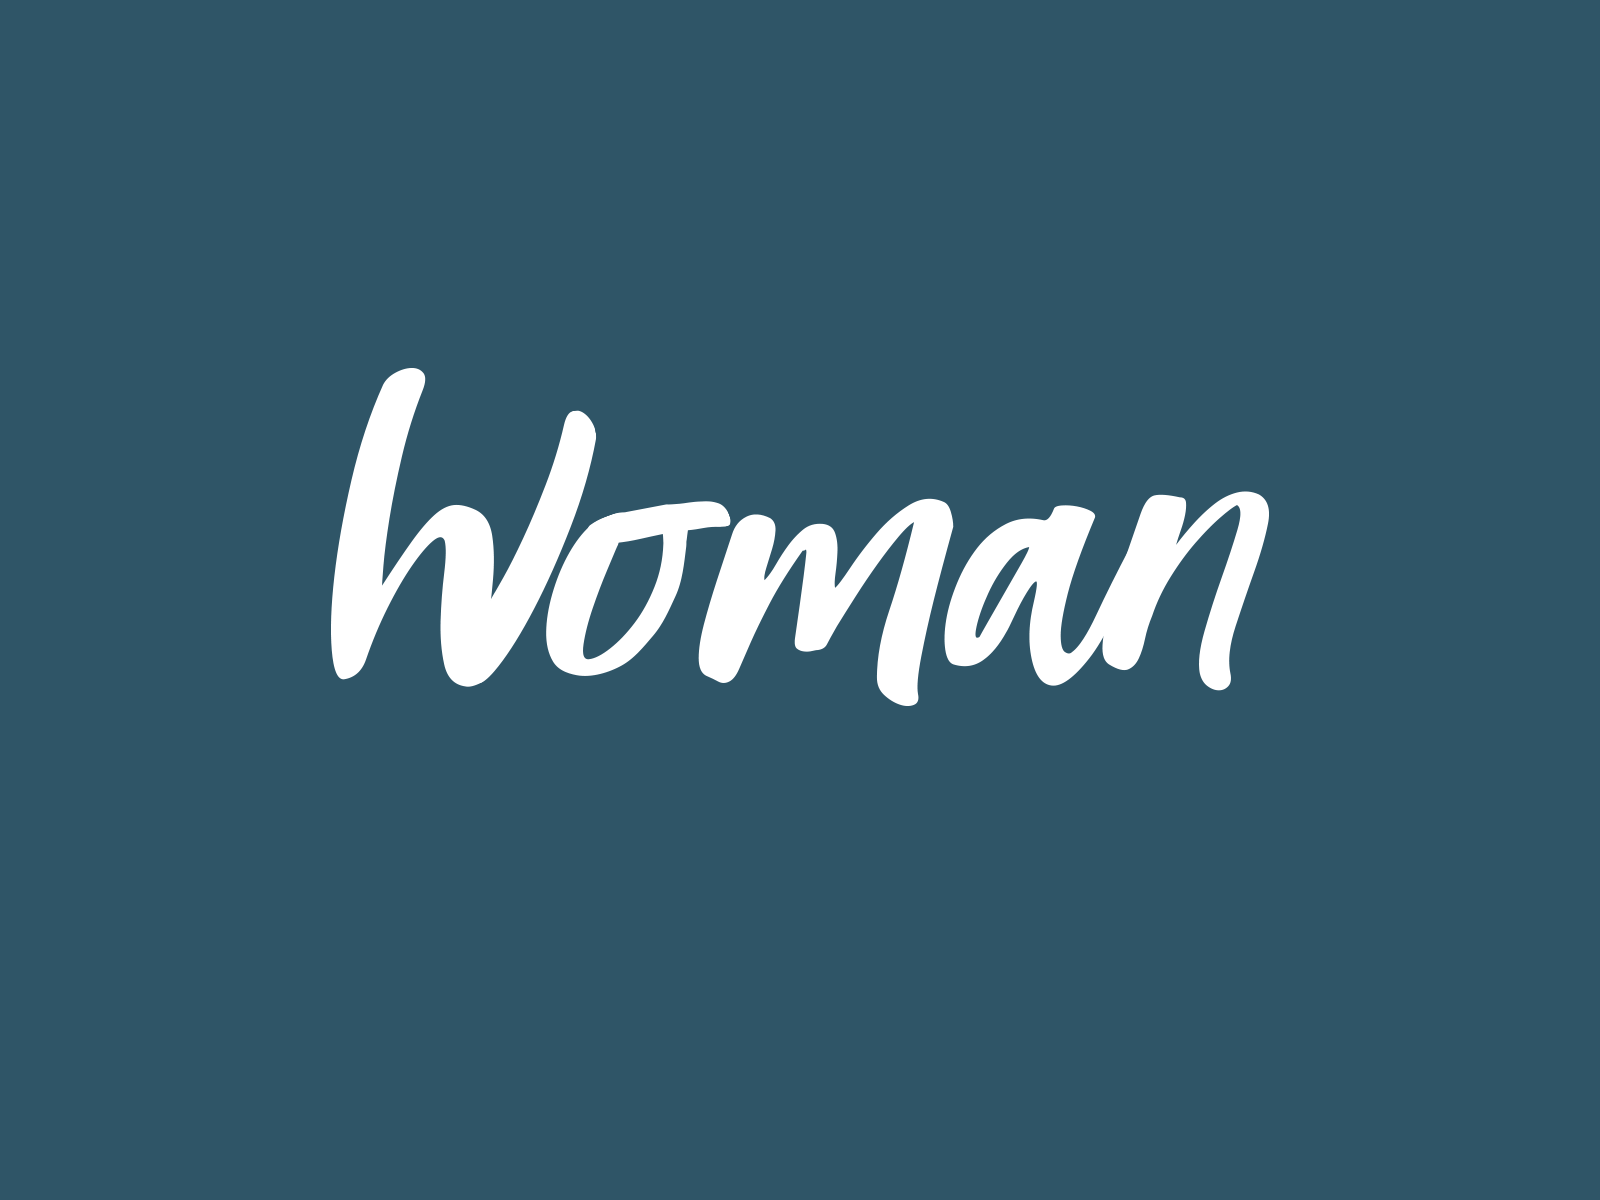 8 March Woman's Day 8 march adobe photoshop animated gif animation design inspiration gender equality human humans type animation typographic typography typography art woman womans womans day women women empowerment